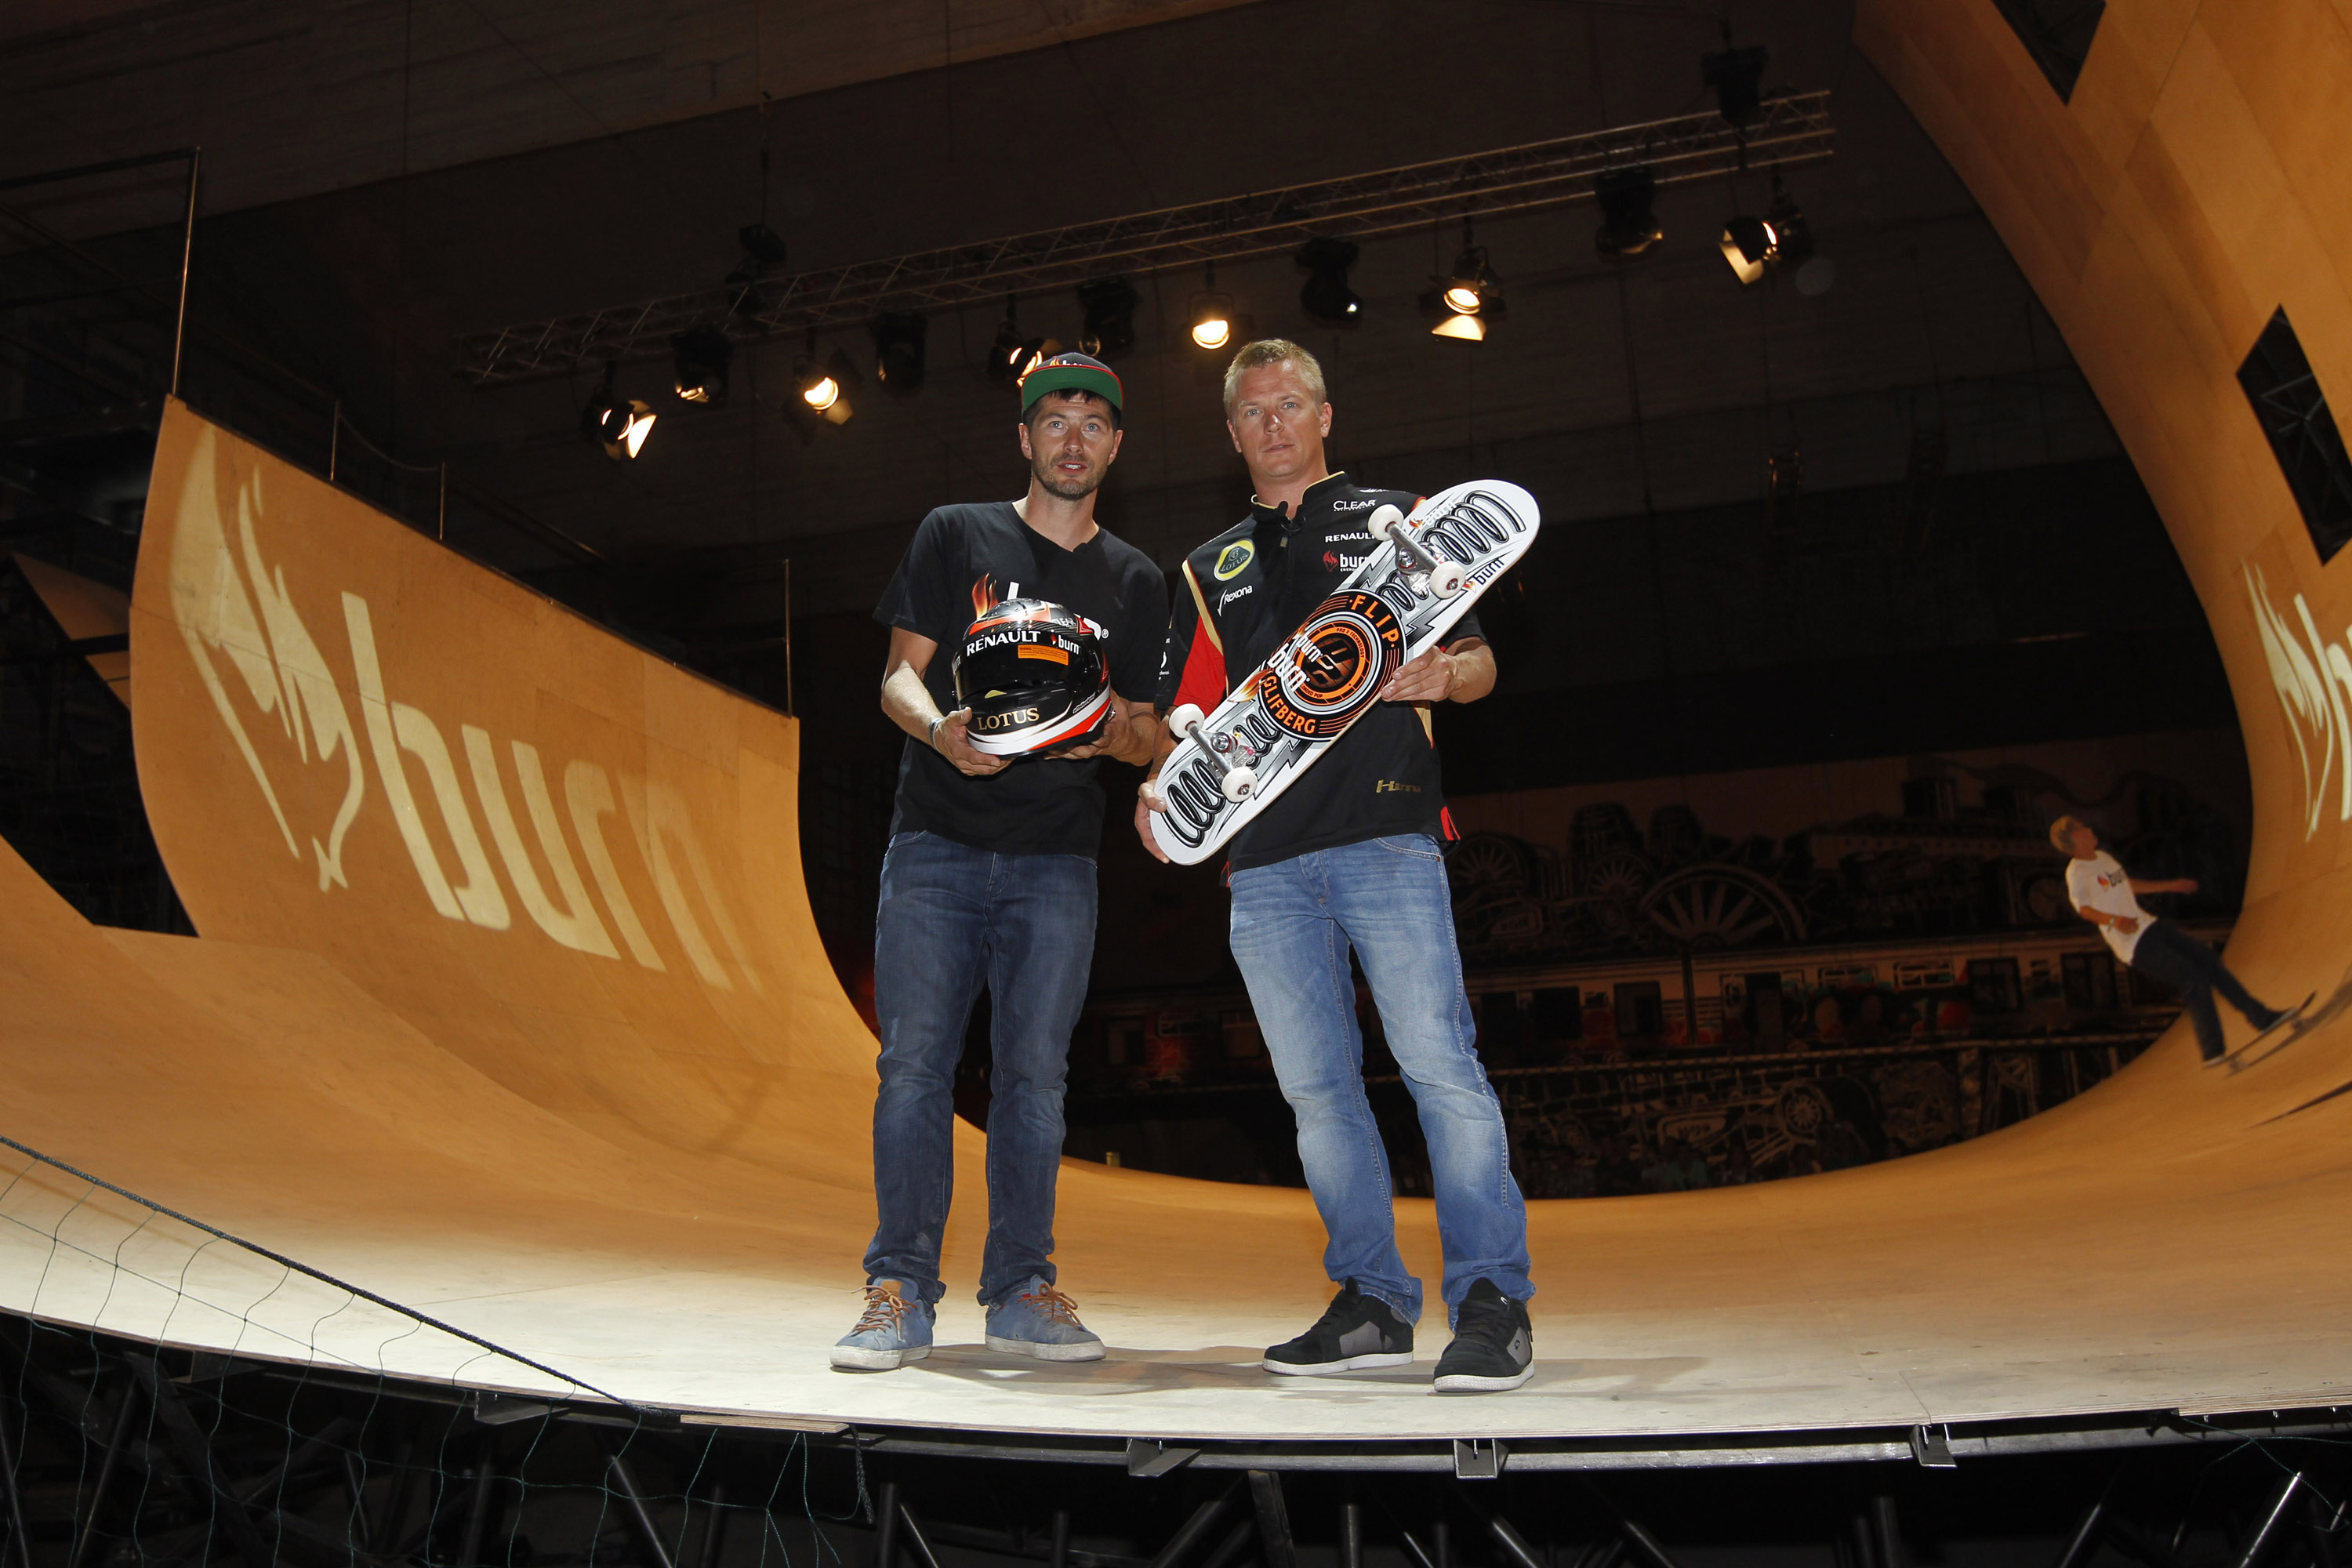  Lotus F1¨ Team driver Kimi R ikk nen exchanging his F1 helmet for a customised skateboard from champion skateboarder Rune Glifberg at burn Yard Live in Budapest, 26th July 2013